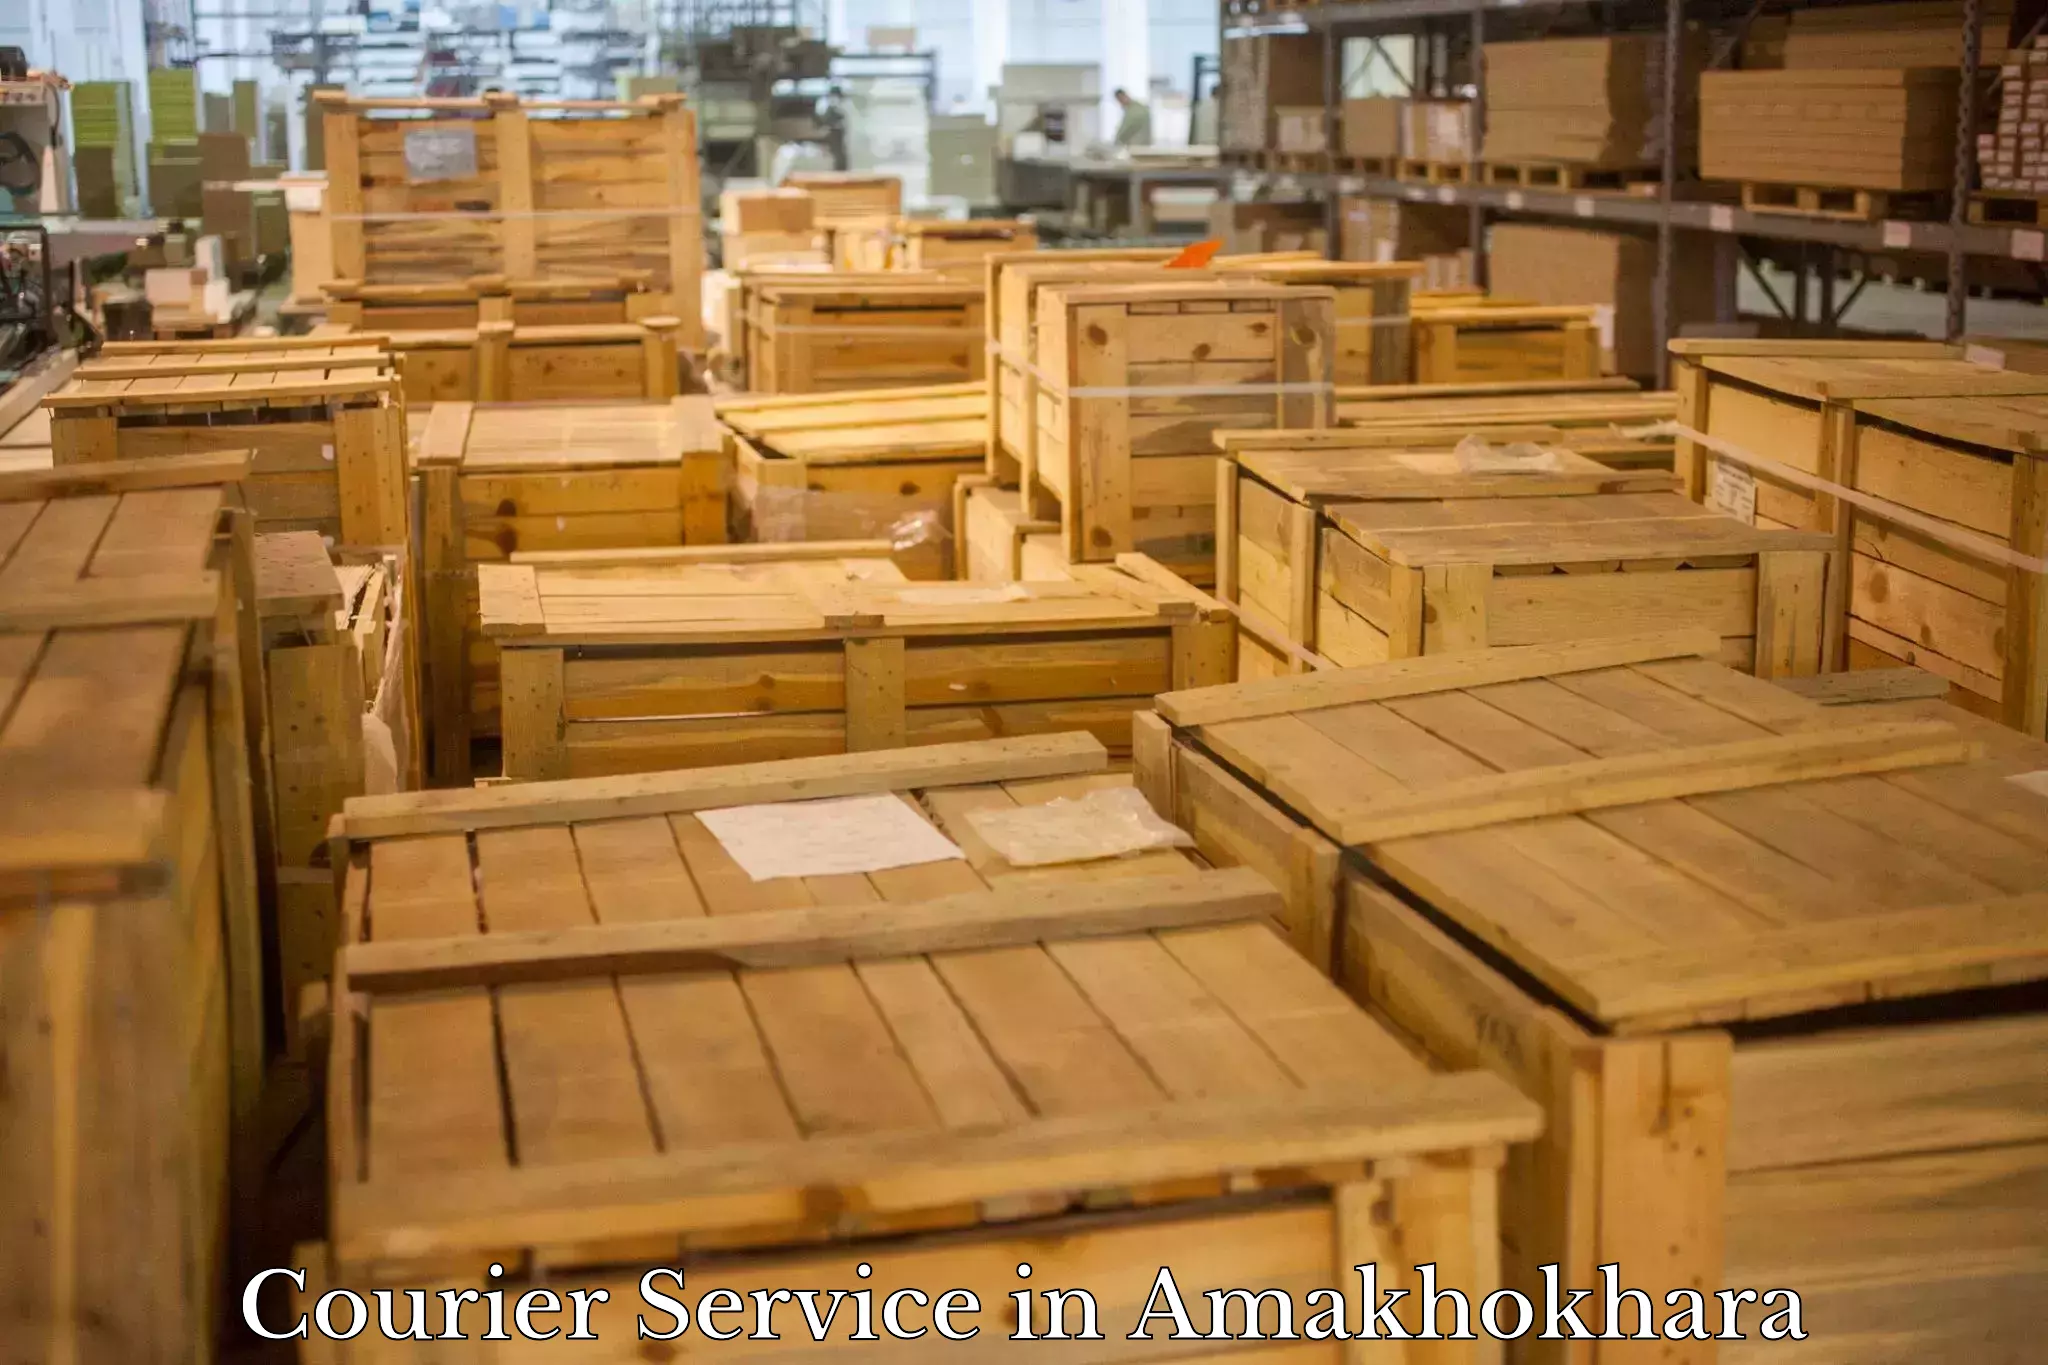 Courier insurance in Amakhokhara